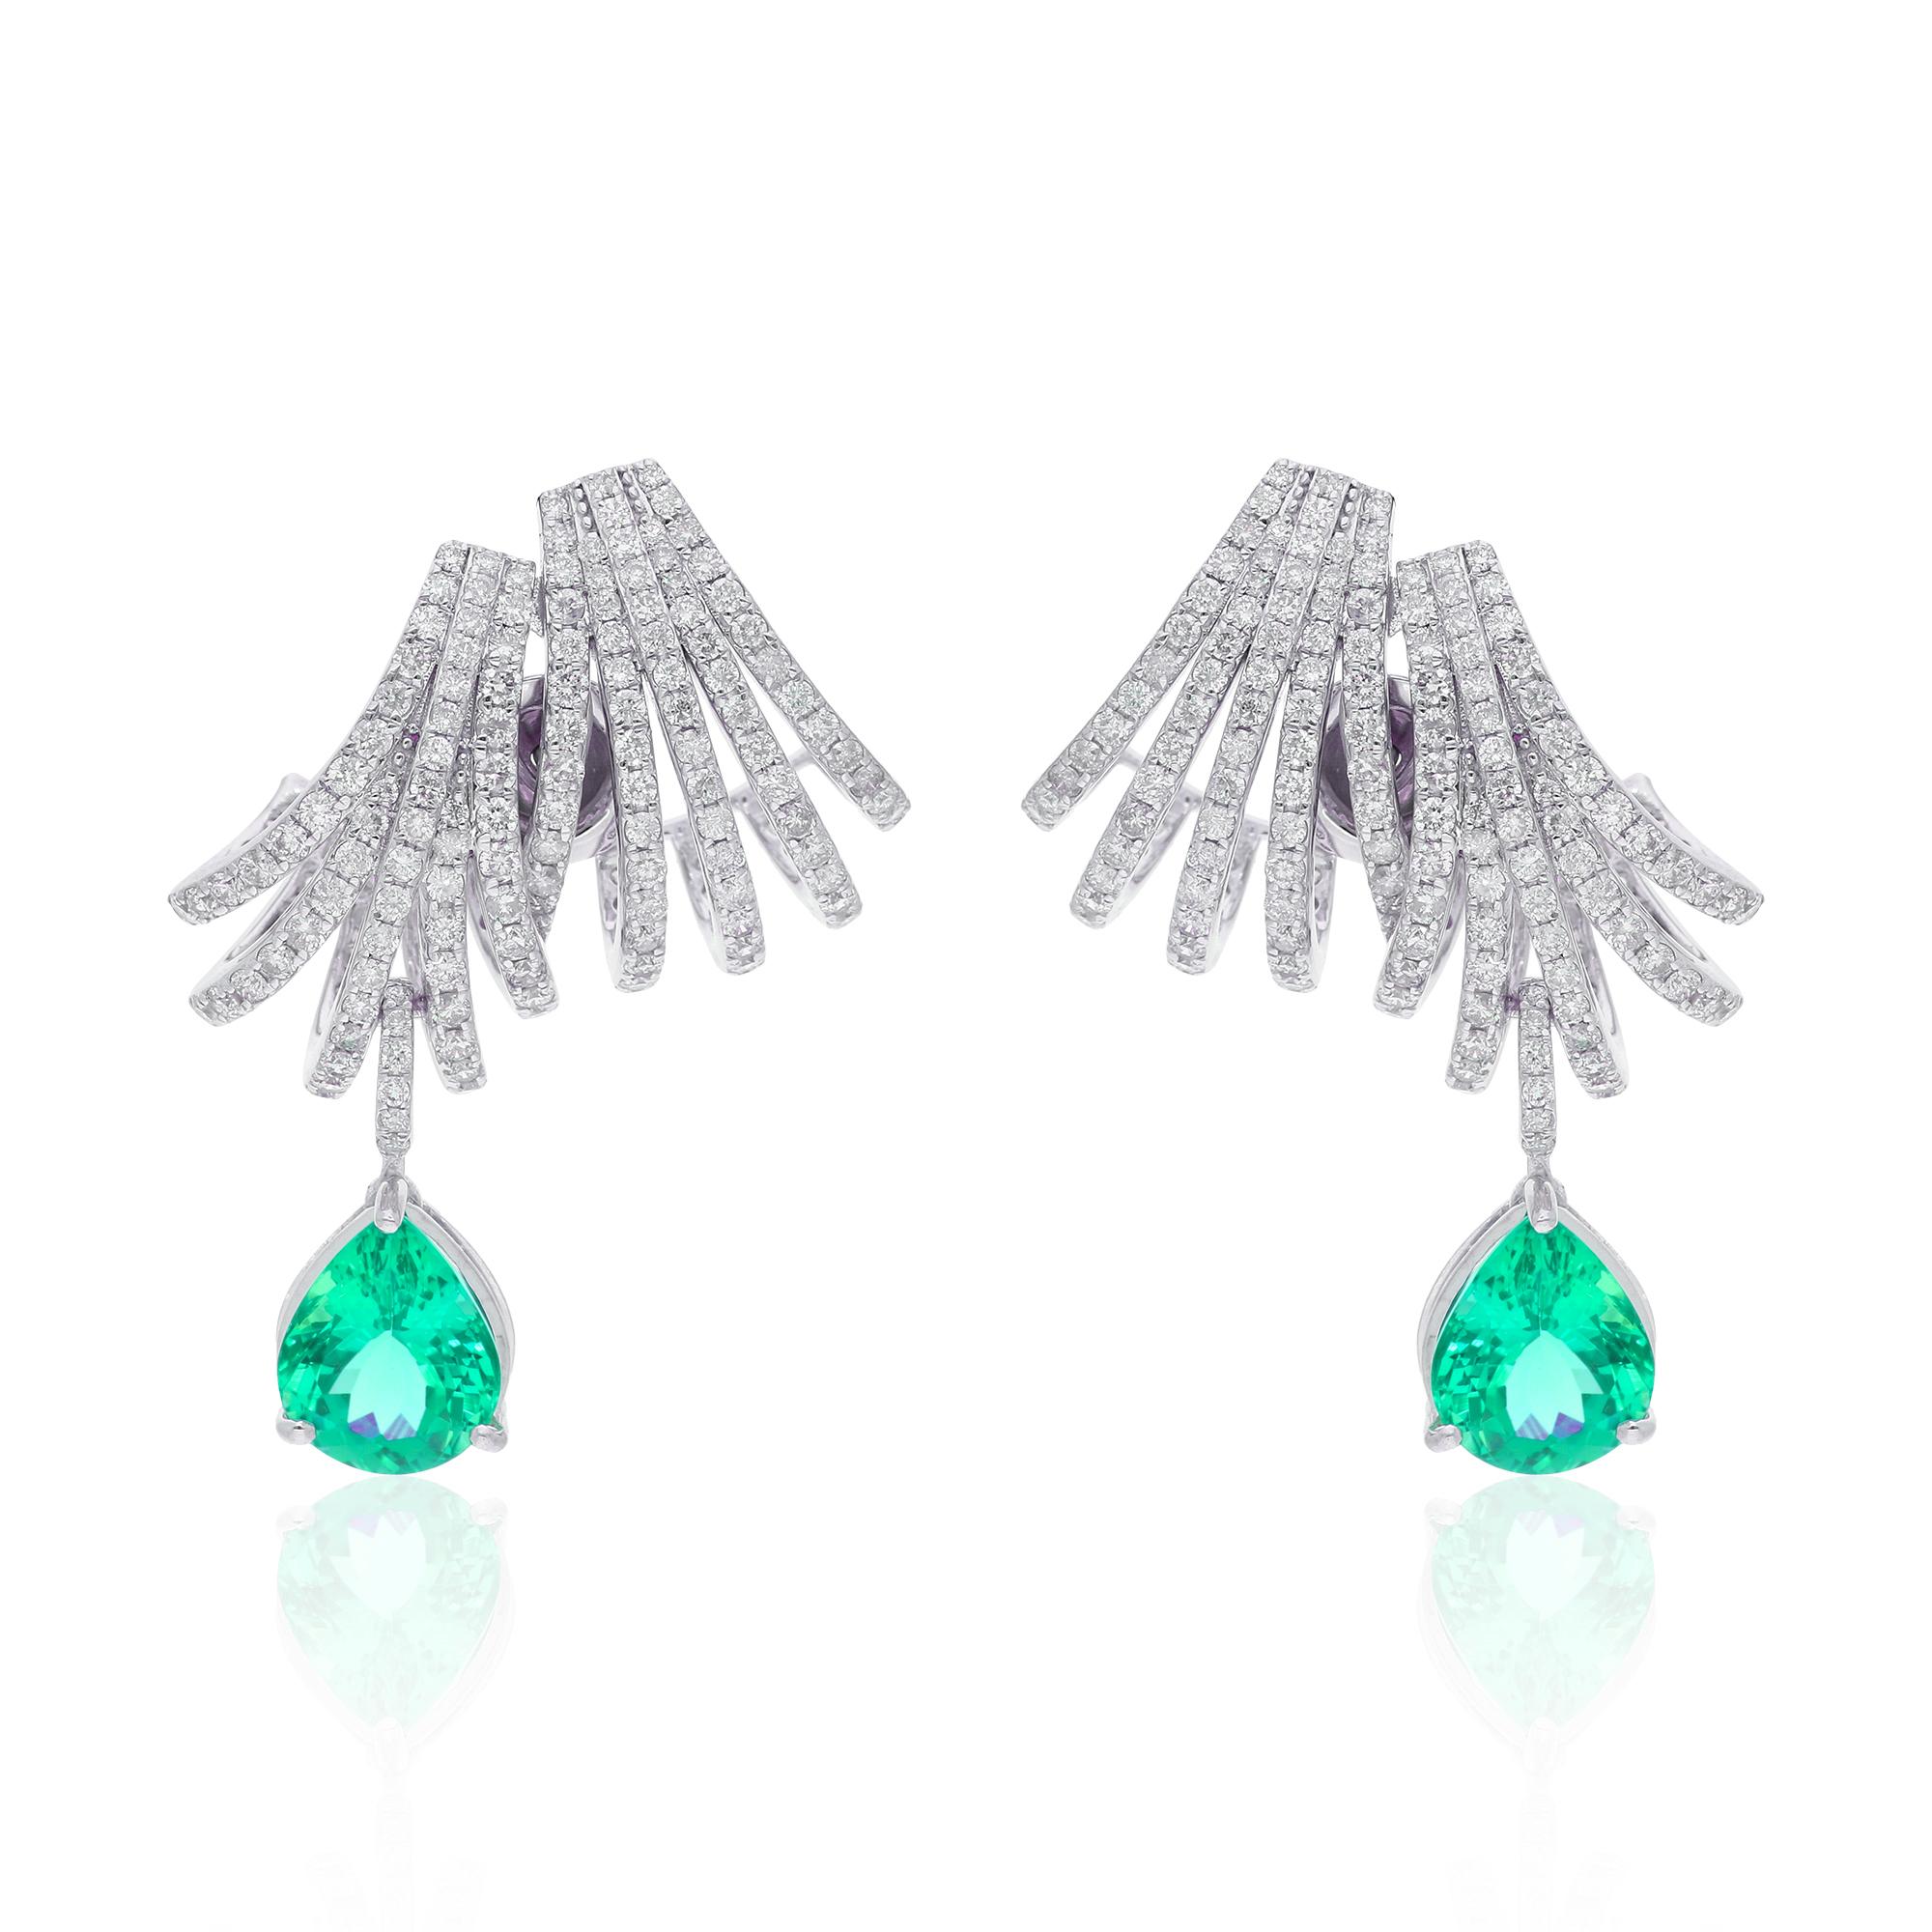 Item Code :- SEE-13532B
Gross Wt. :- 18.90 gm
18k Solid White Gold Wt. :- 17.46 gm
Natural Diamond Wt. :- 4.15 Ct. ( AVERAGE DIAMOND CLARITY SI1-SI2 & COLOR H-I )
Zambian Emerald Wt. :- 3.05 Ct.
Earrings Size :- 33 mm approx.

✦